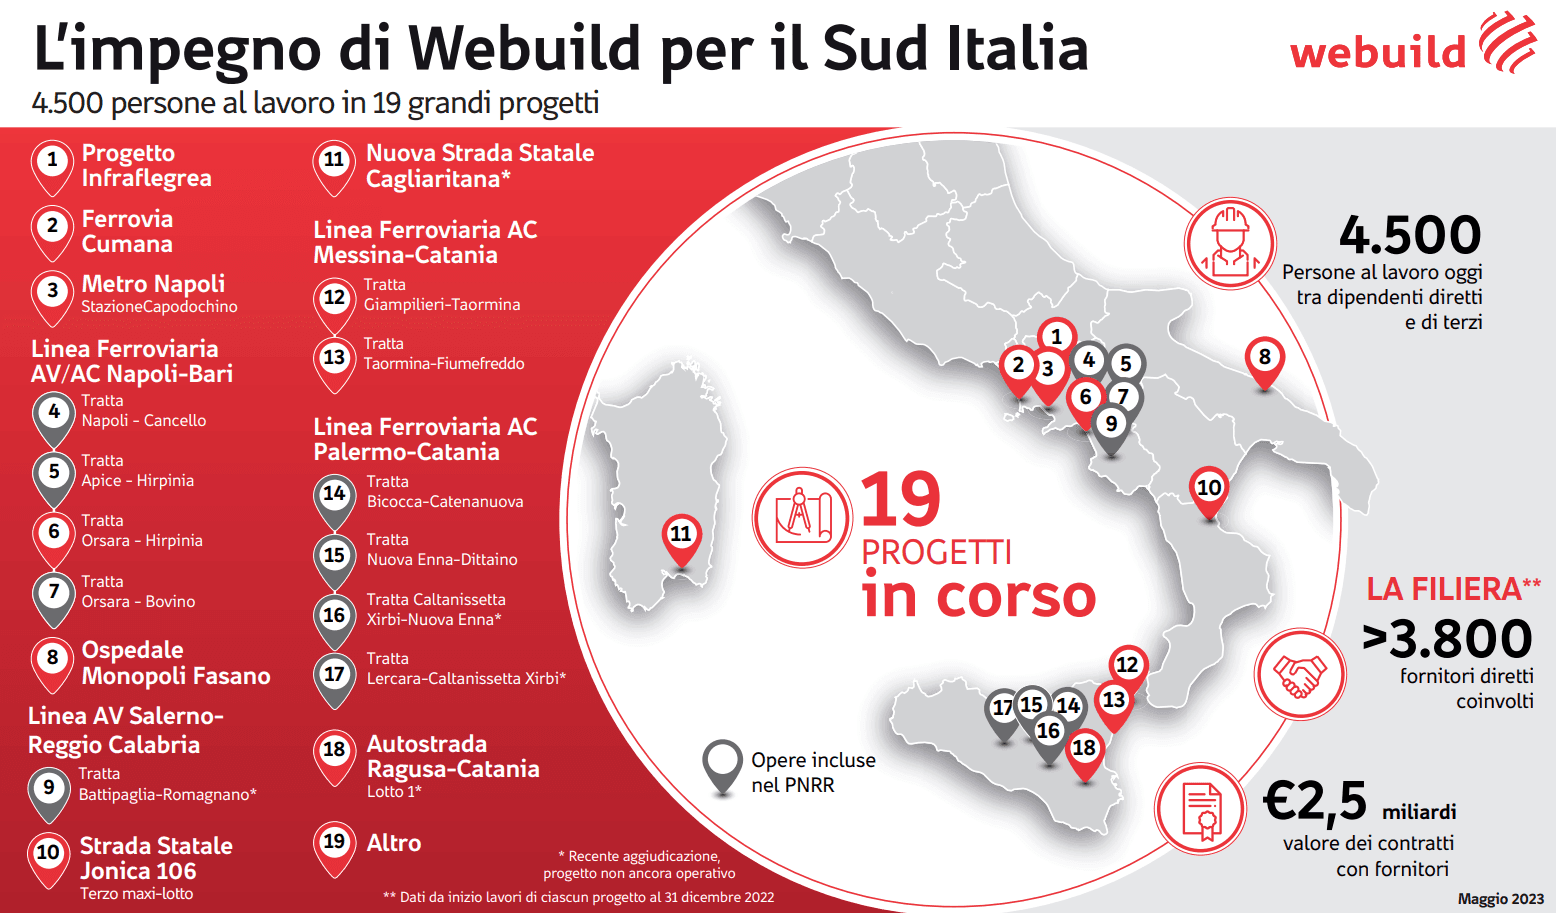 Webuild's commitment to Southern Italy